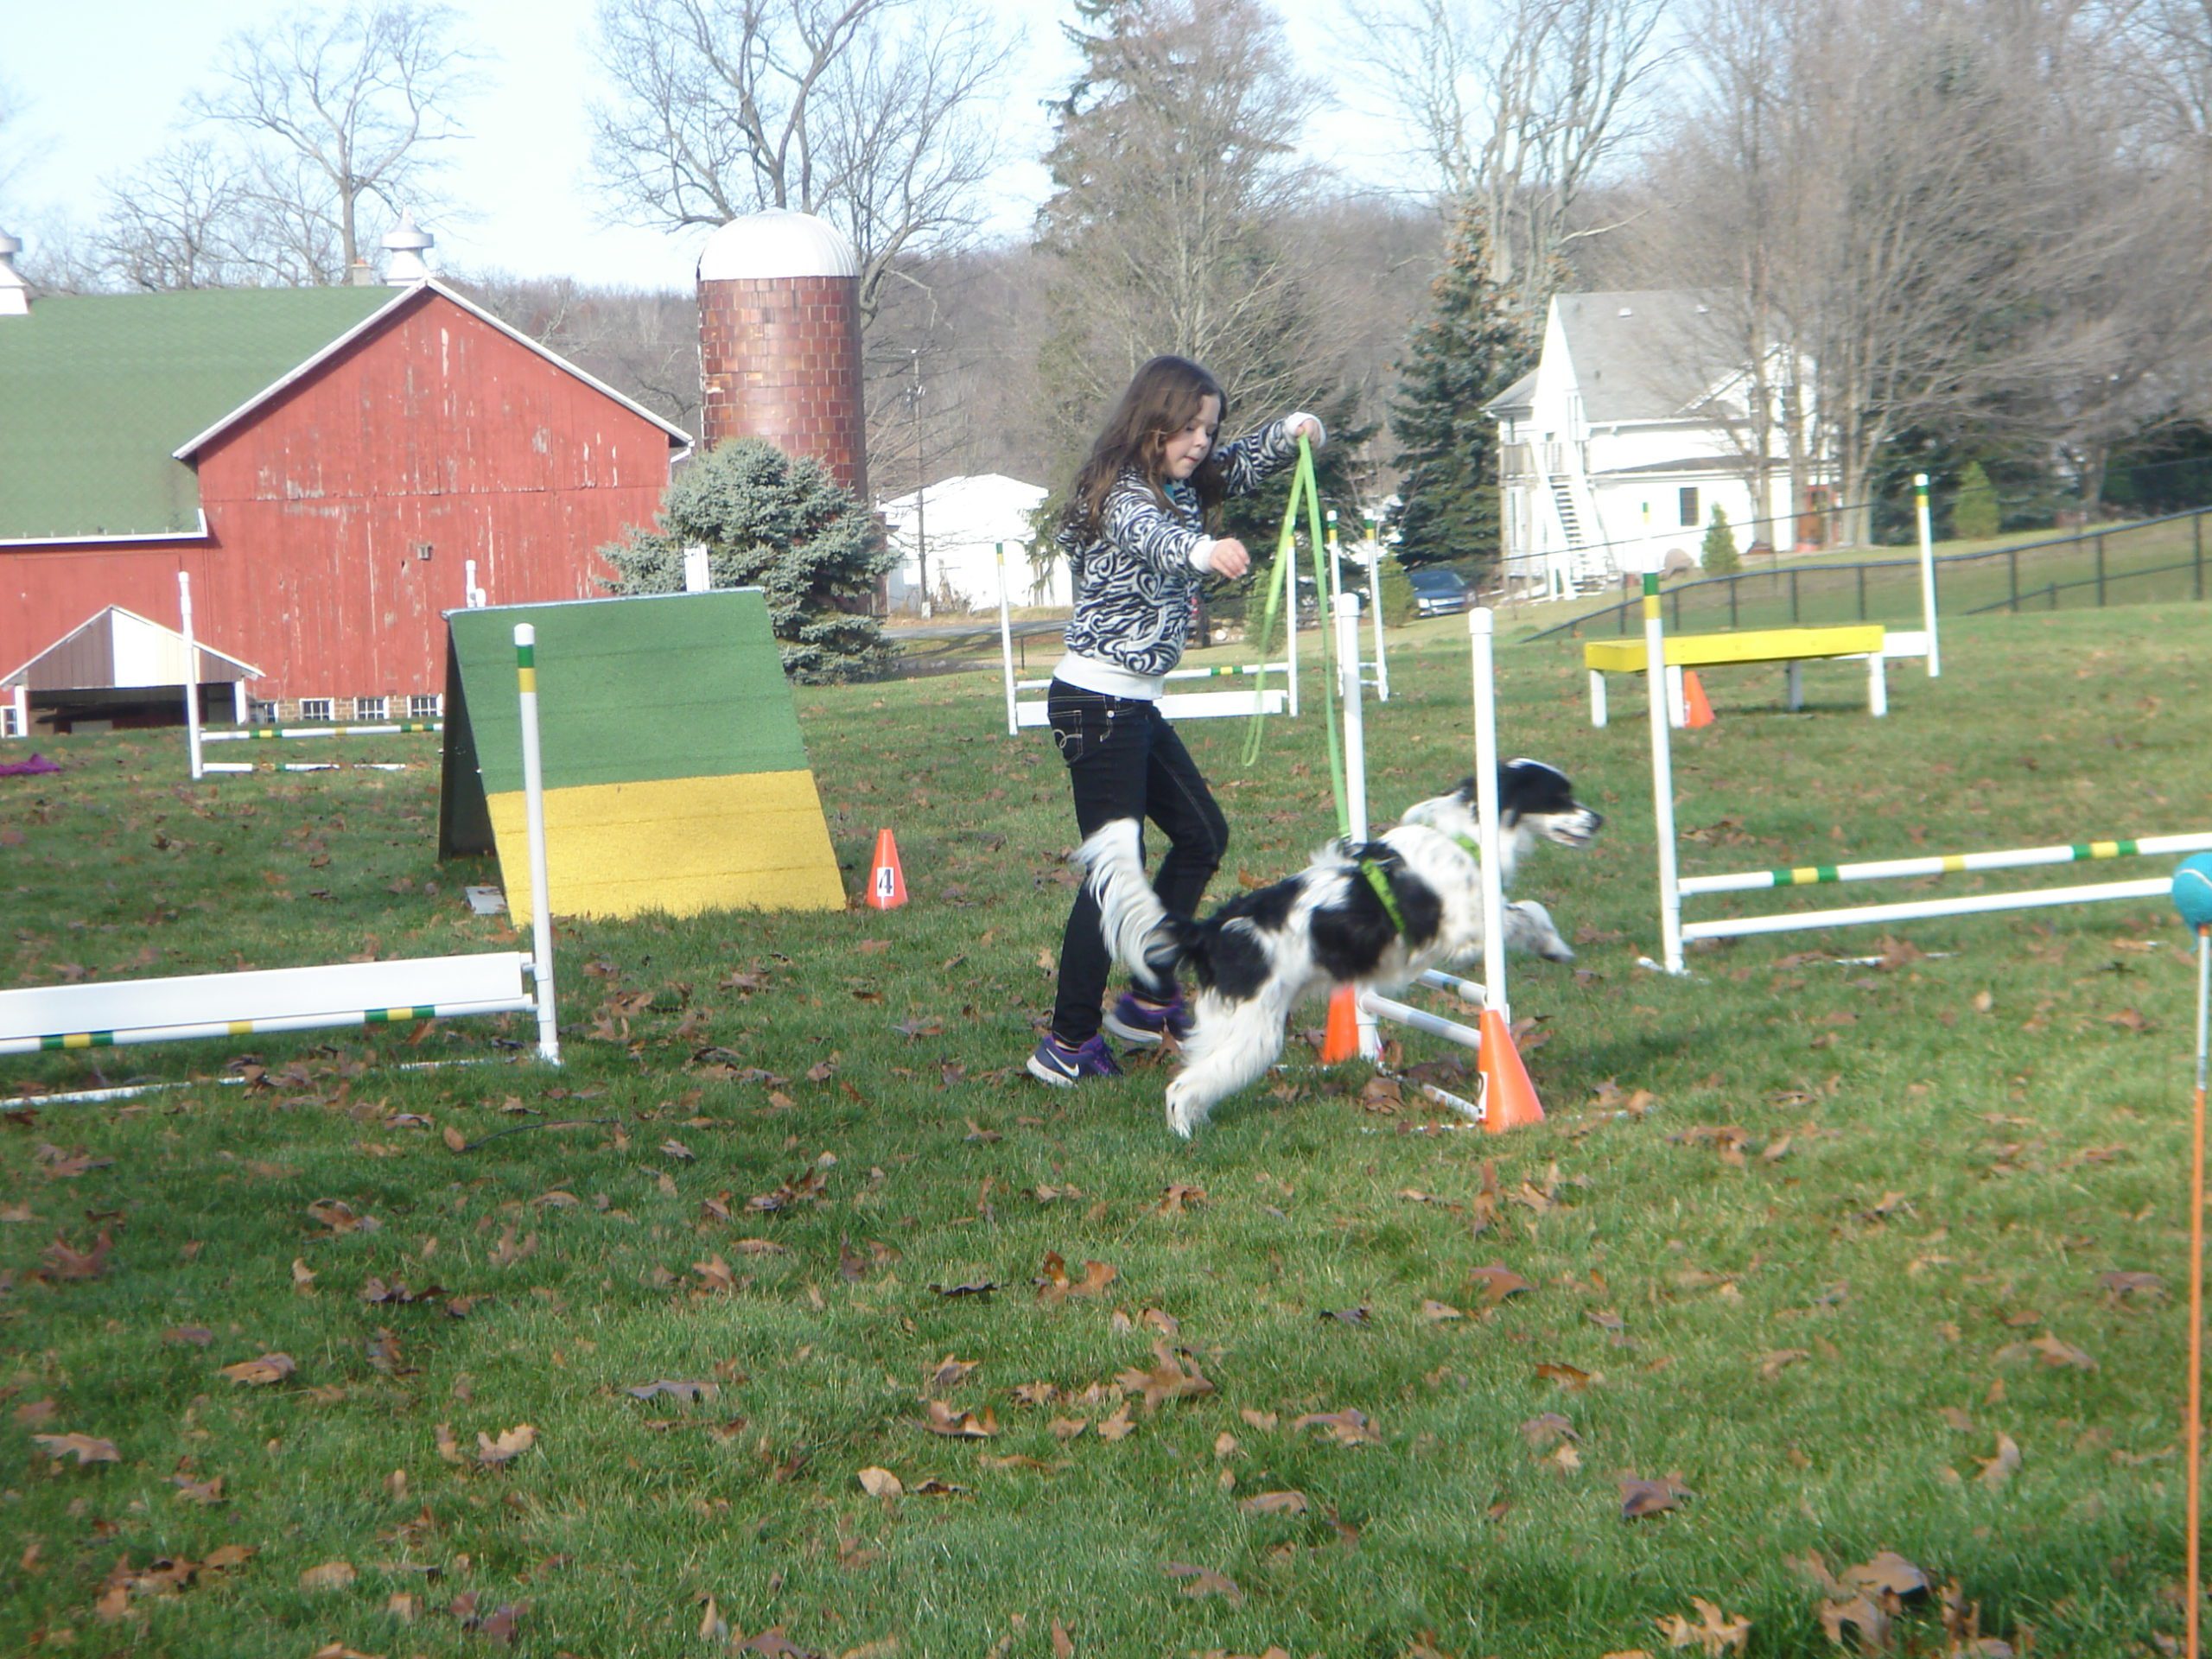 A Dog and Trainor practicing agility courses at the dog park